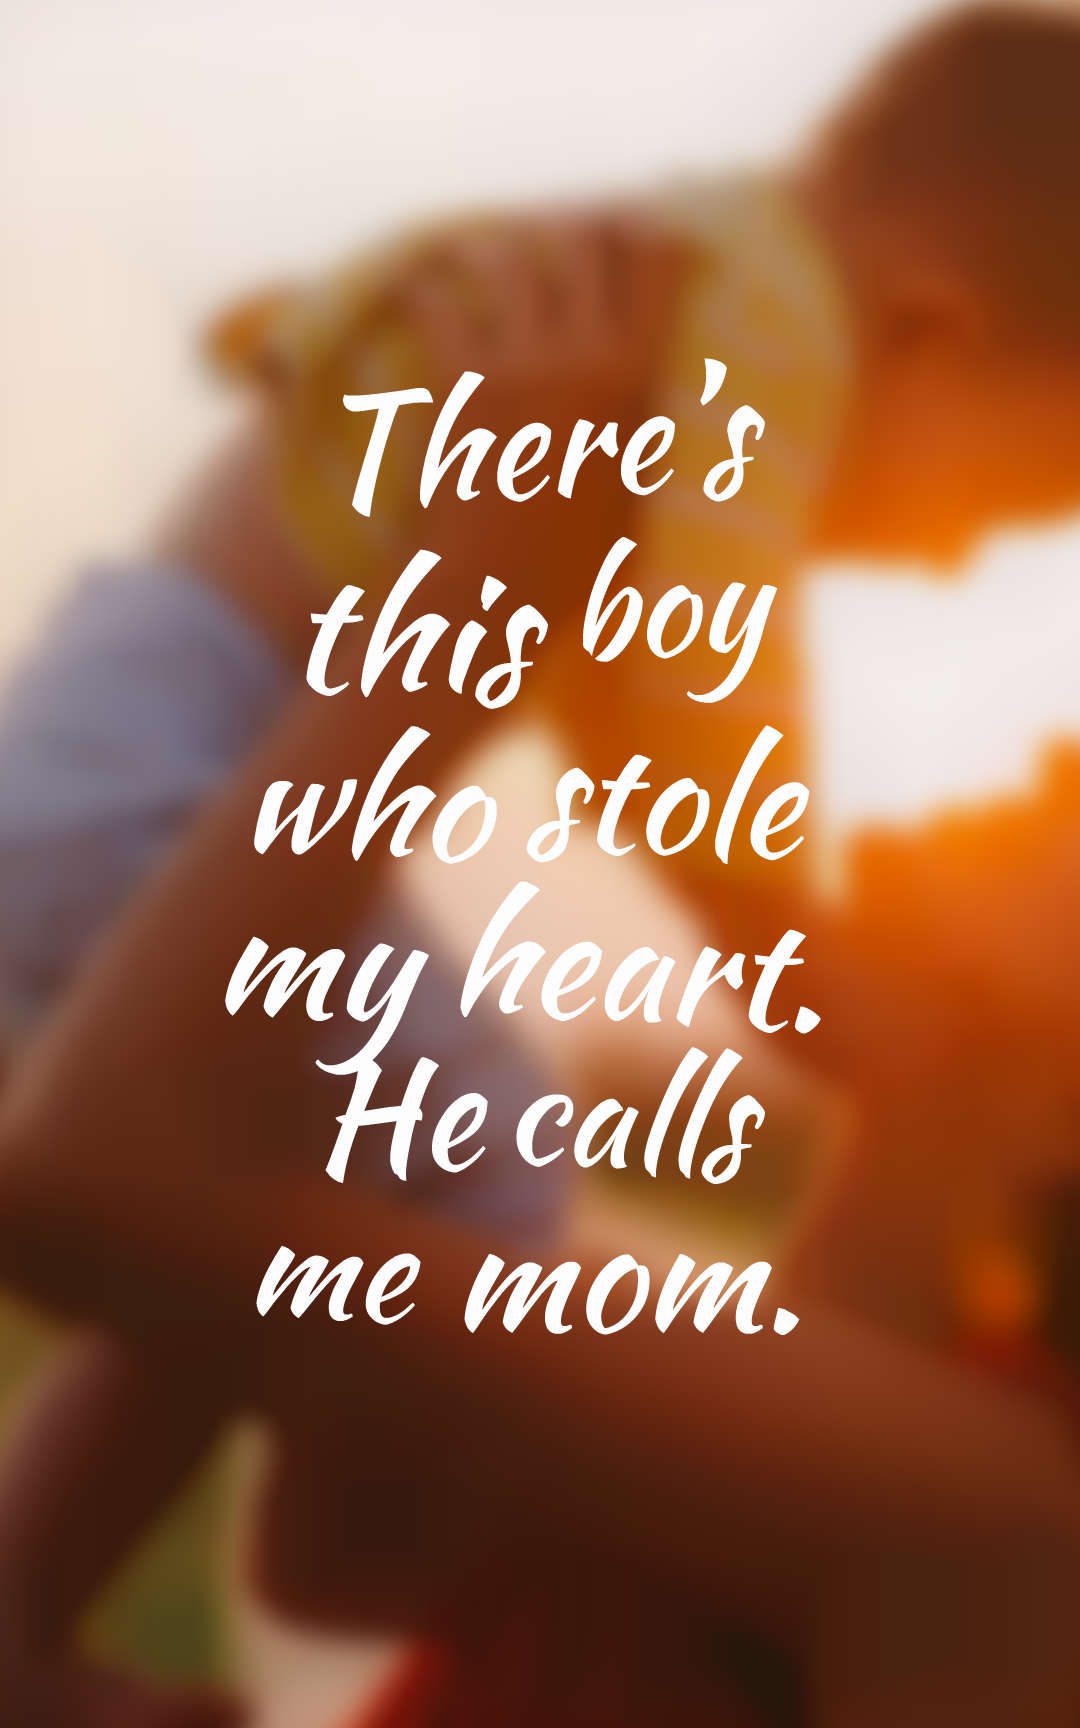 There’s this boy who stole my heart. He calls me mom.